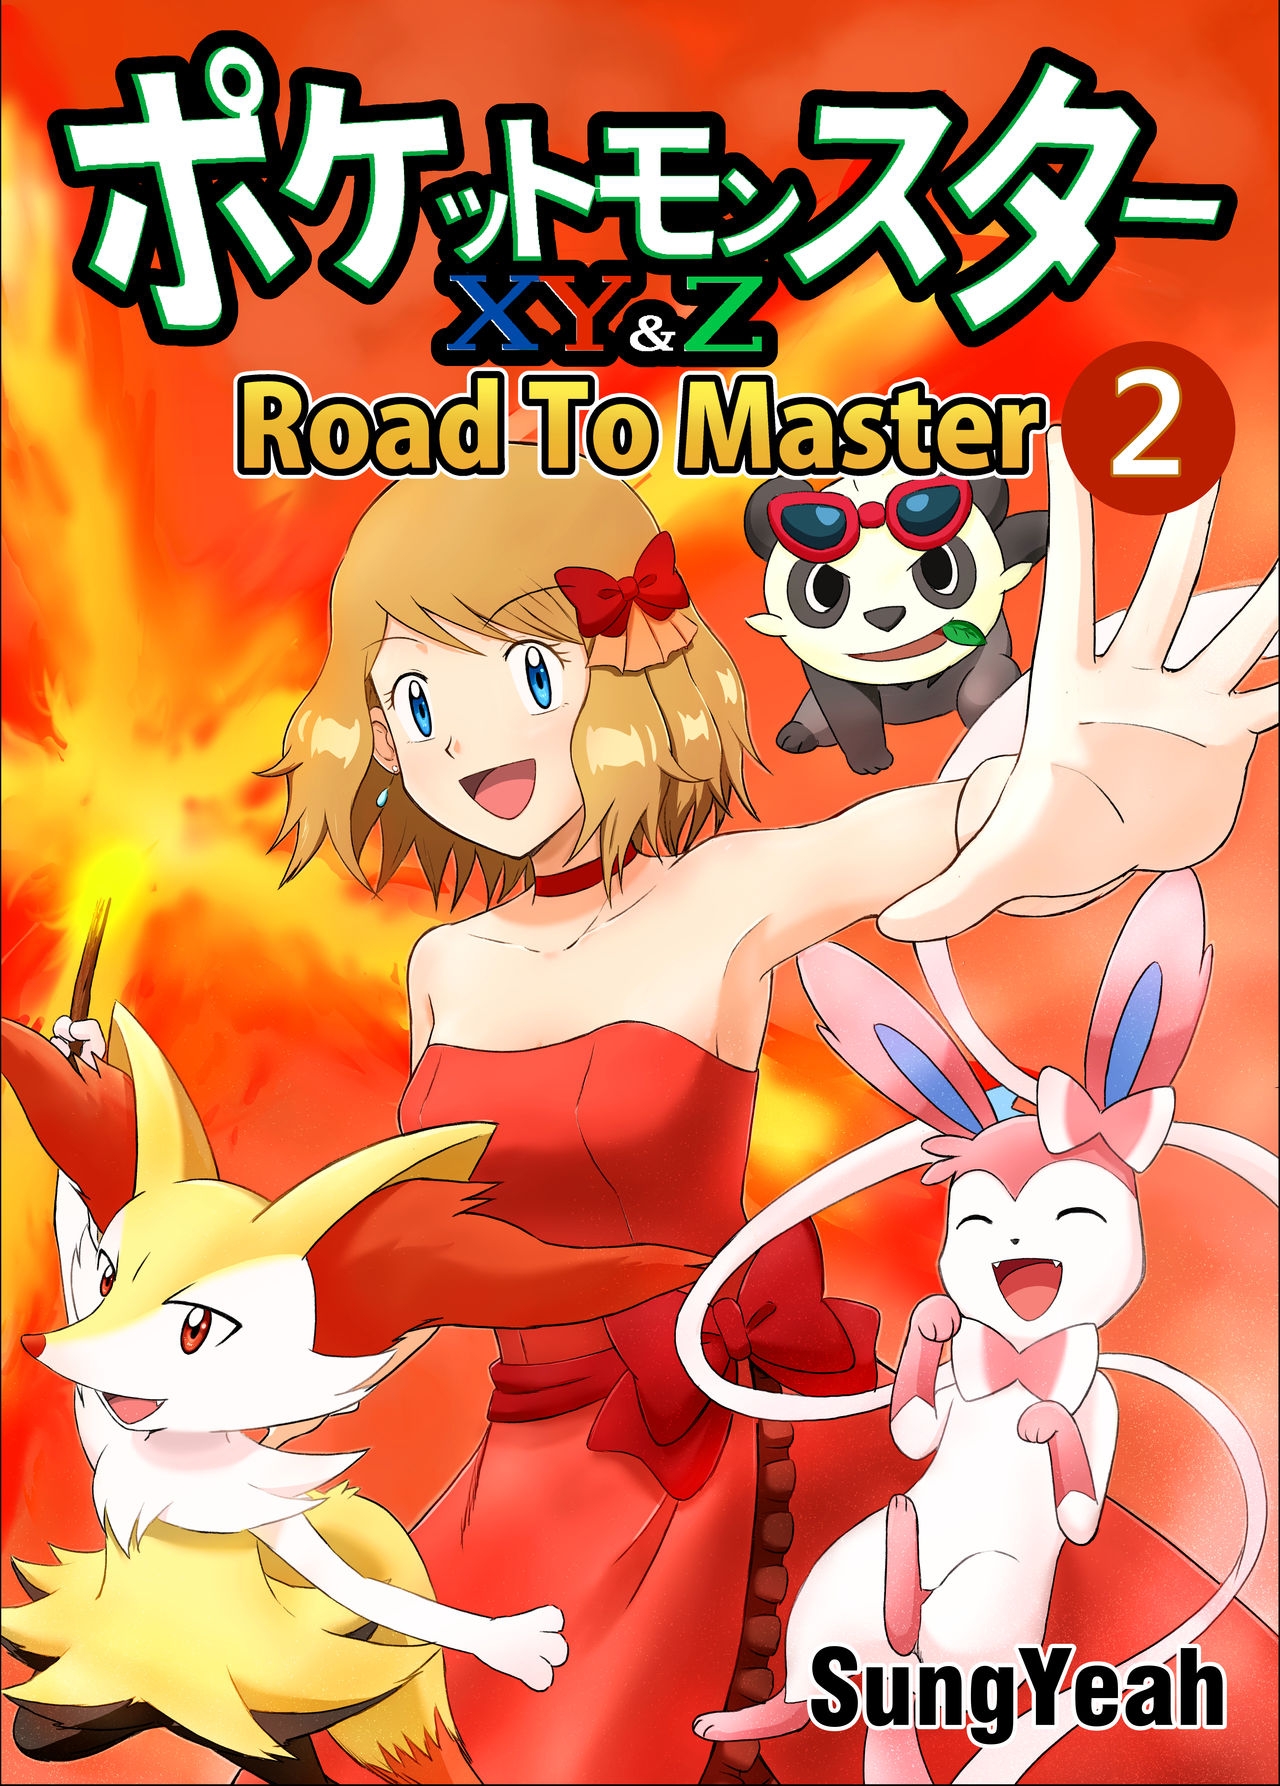 [Sungyeah] Pokemon - Road to Master - Complete 1